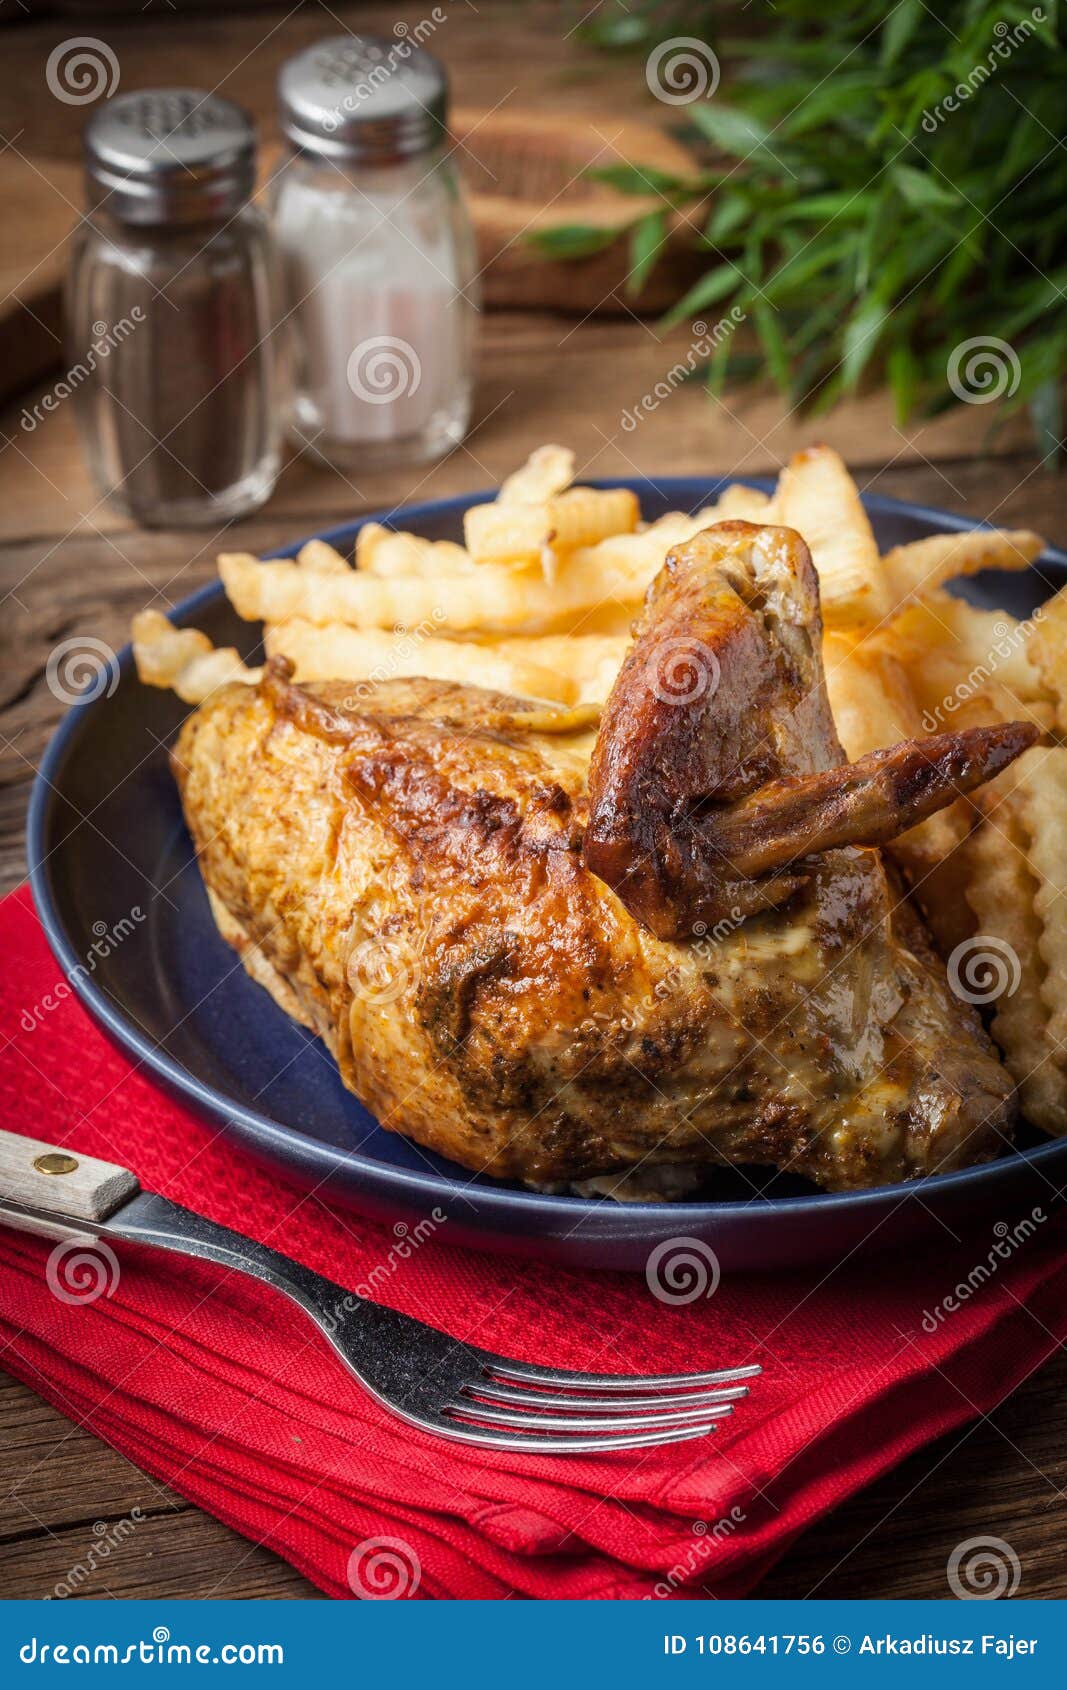 Roasted Chicken with French Fries on a Plate. Stock Photo - Image of ...